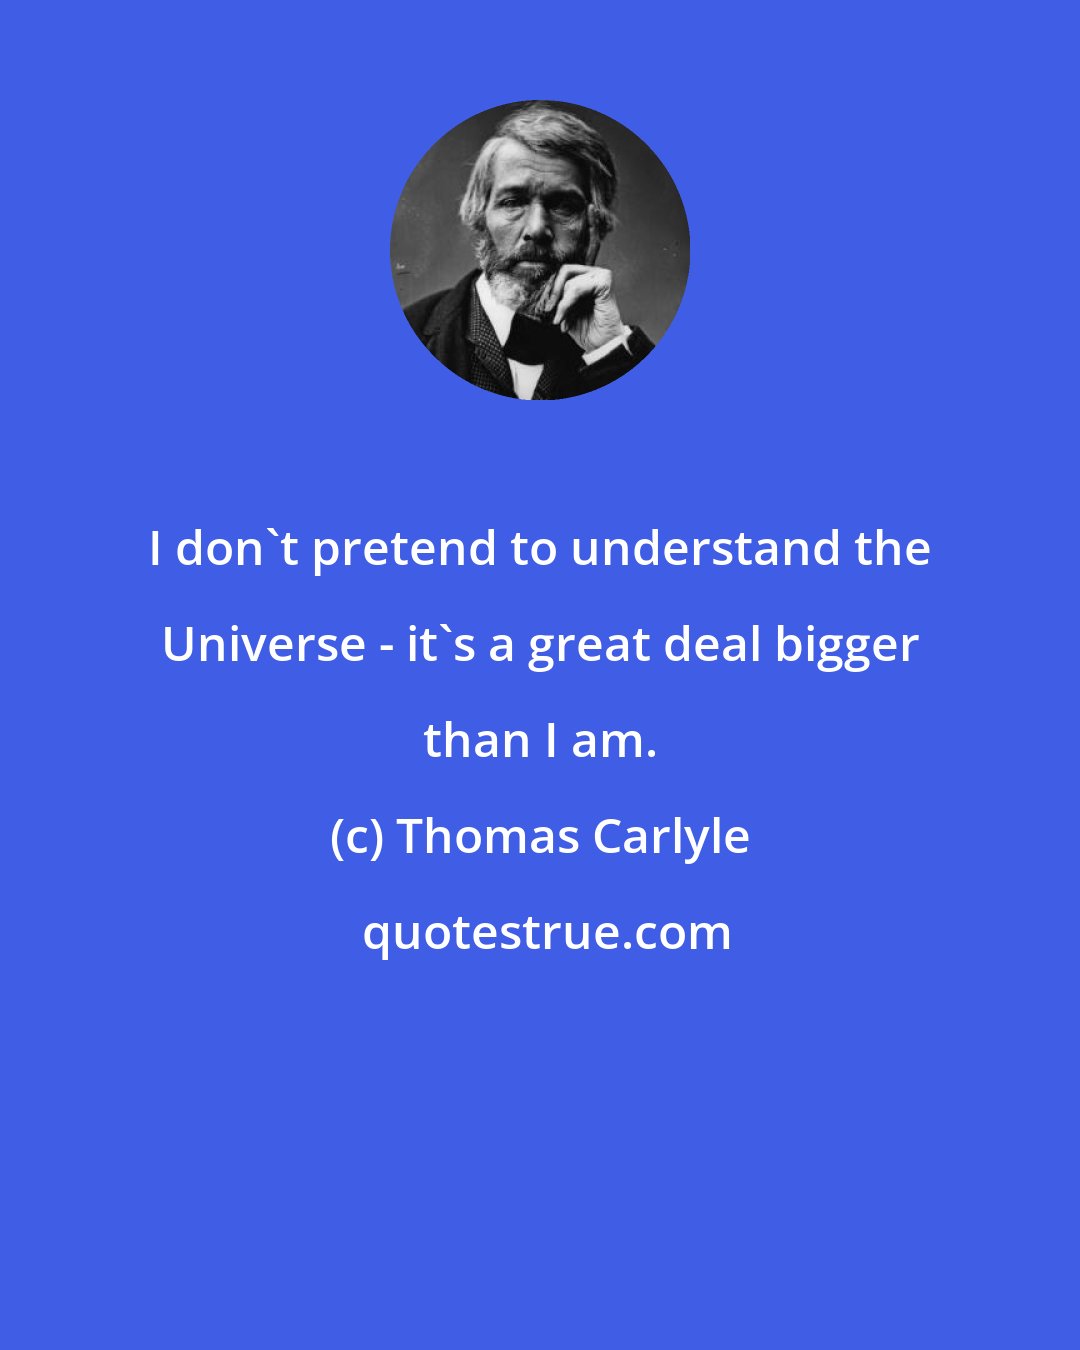 Thomas Carlyle: I don't pretend to understand the Universe - it's a great deal bigger than I am.